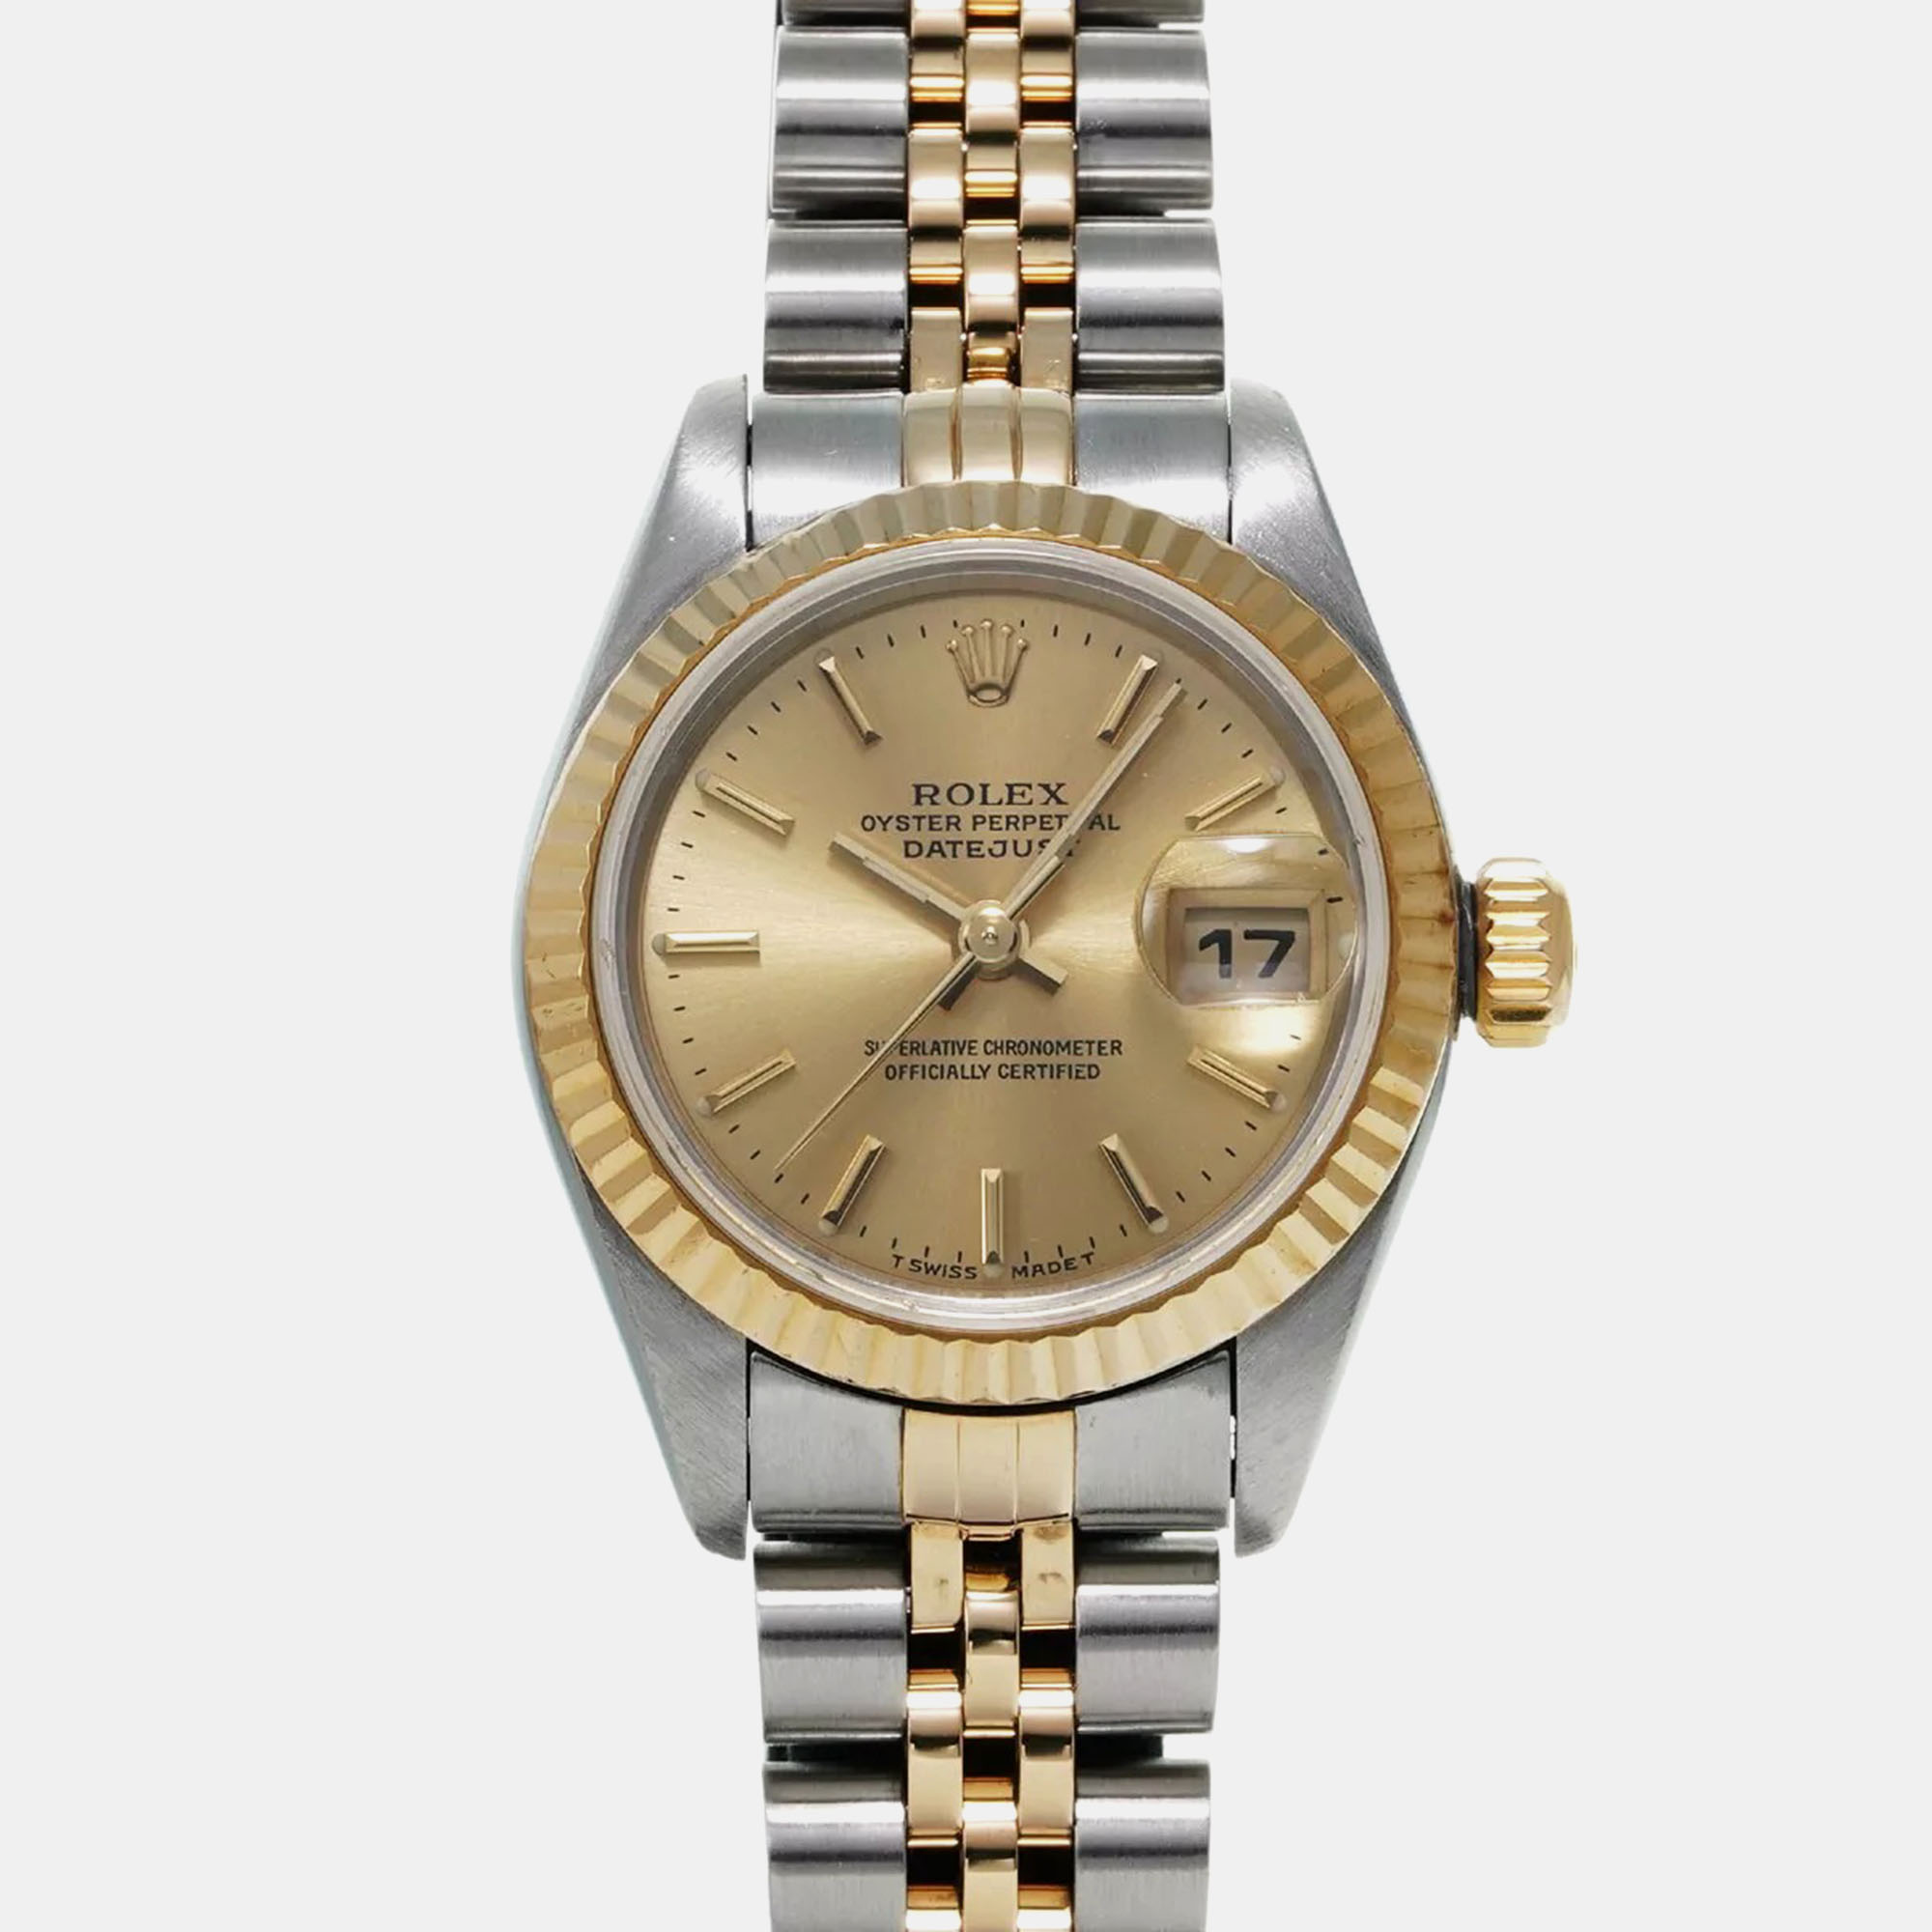 Rolex champagne 18k yellow gold stainless steel datejust 79173 automatic women's wristwatch 26 mm